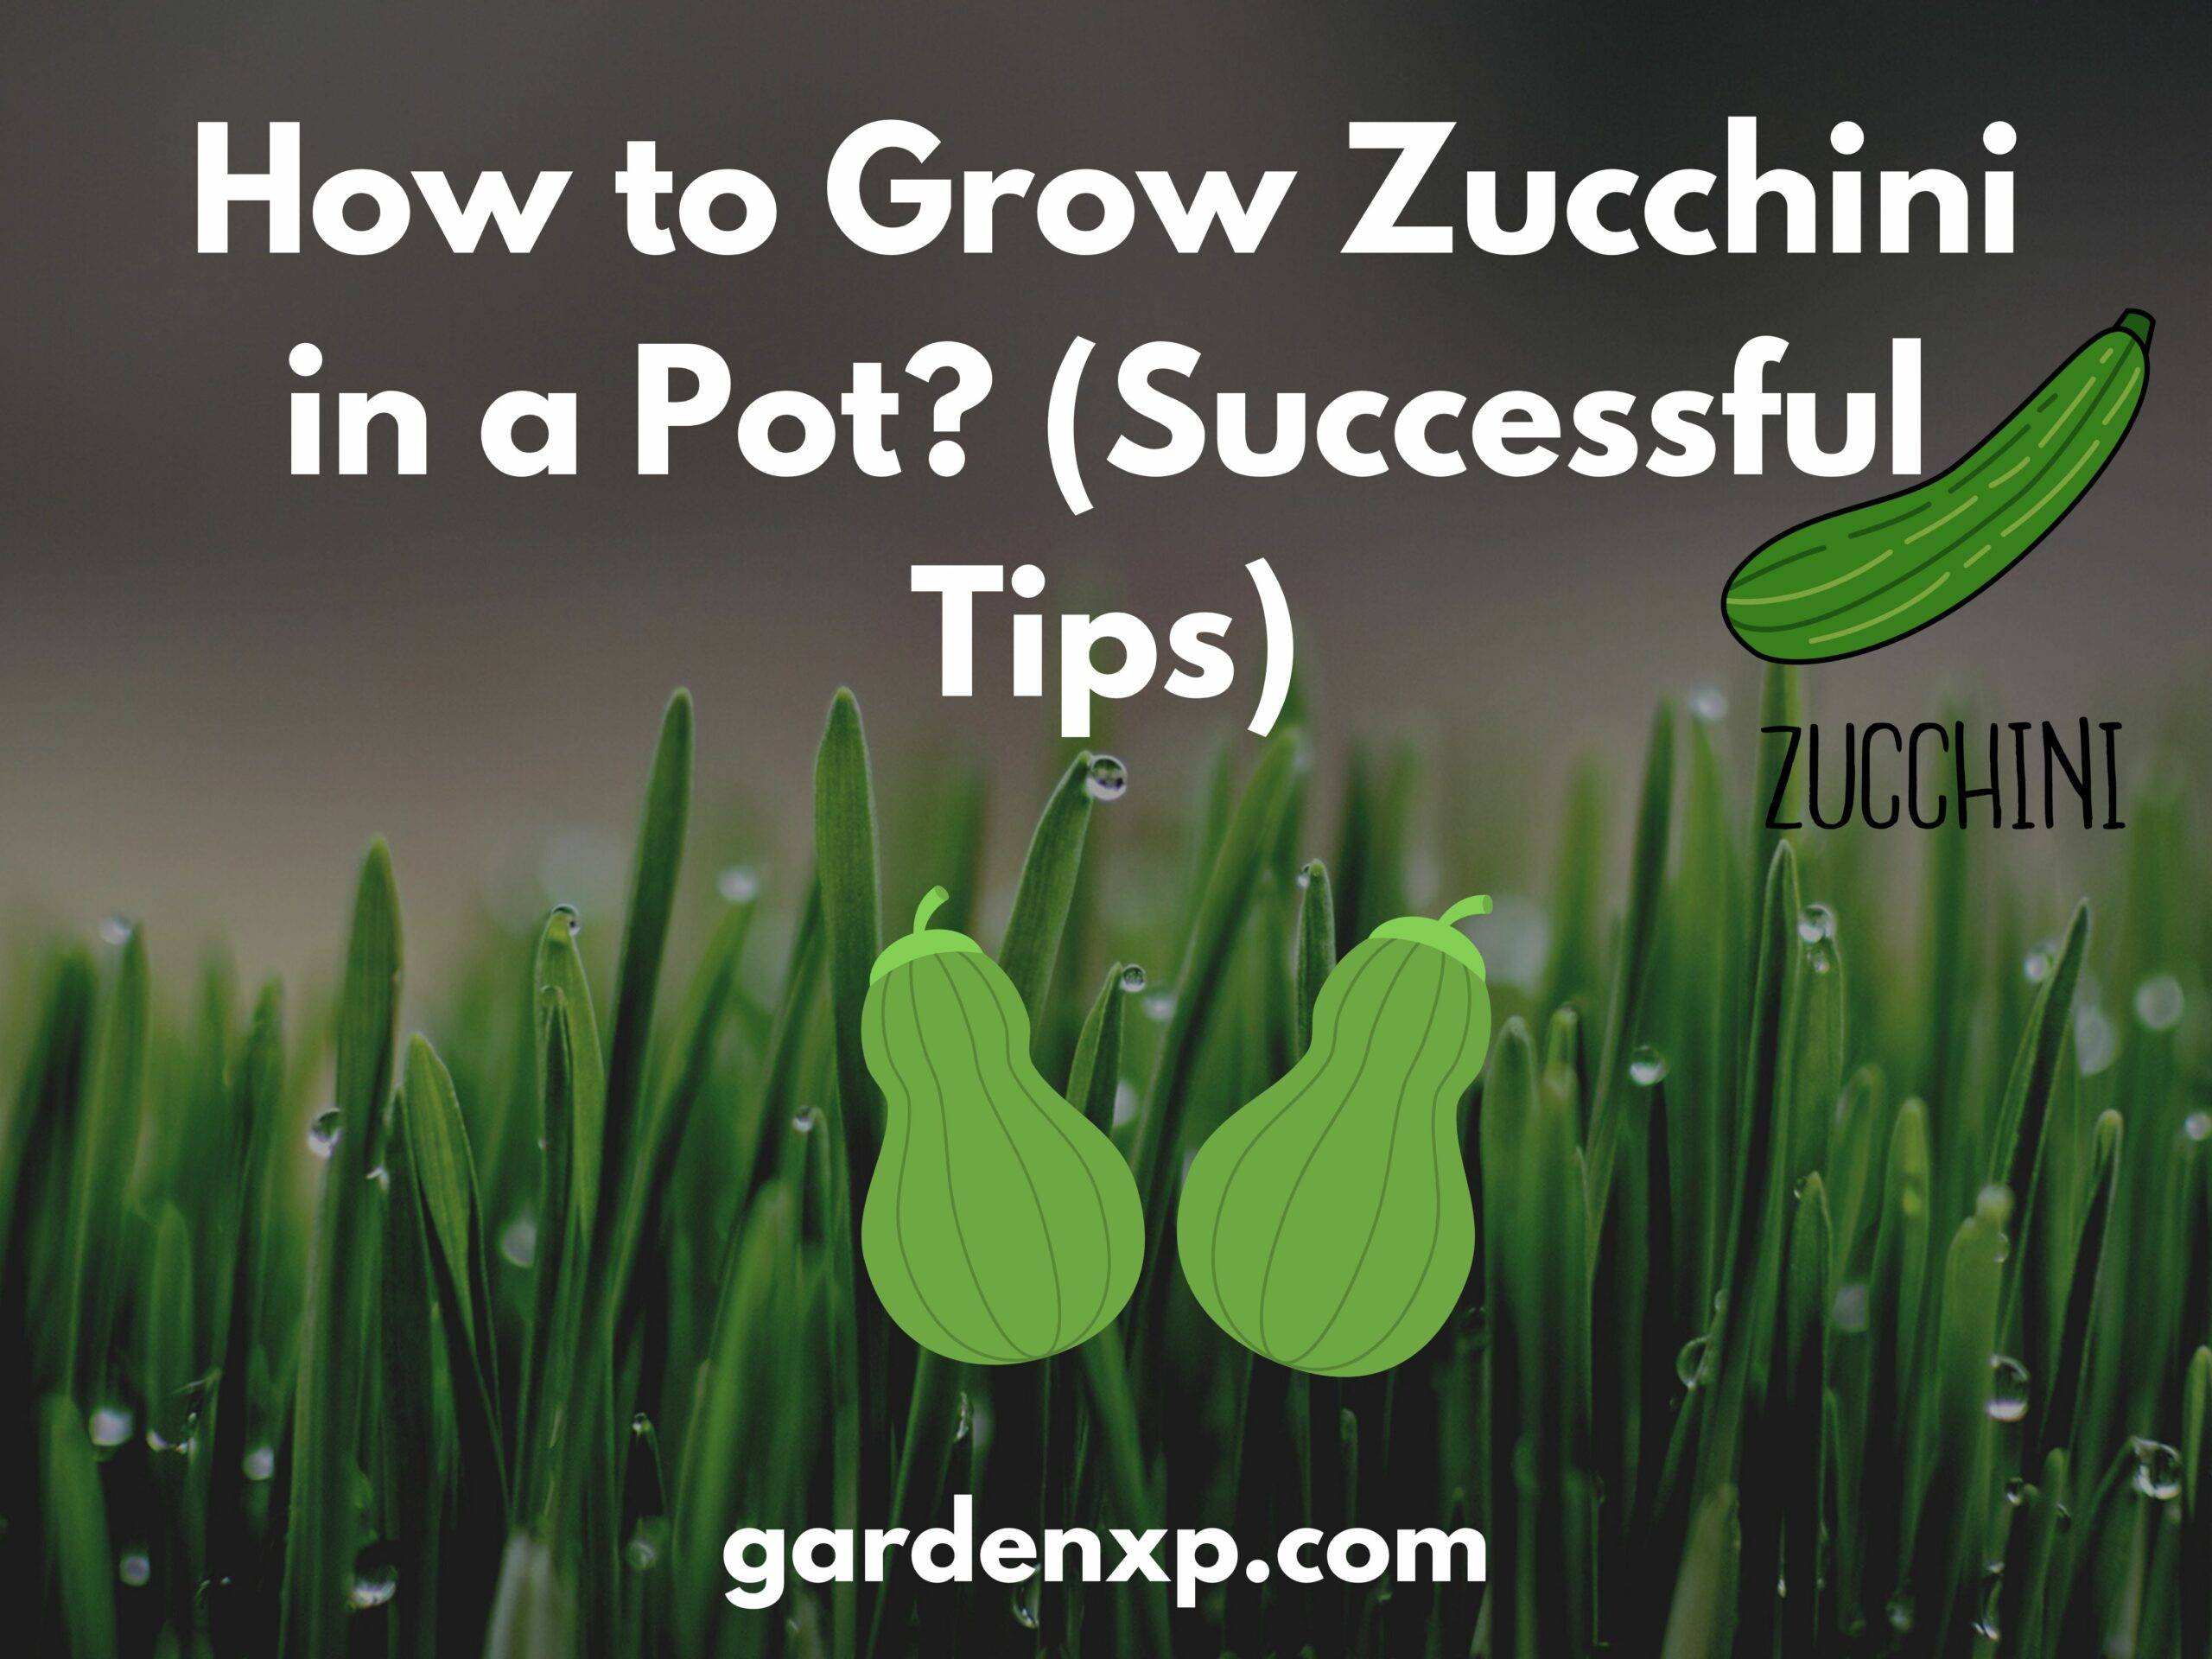 How to Grow Zucchini in a Pot? (10 Successful Tips)